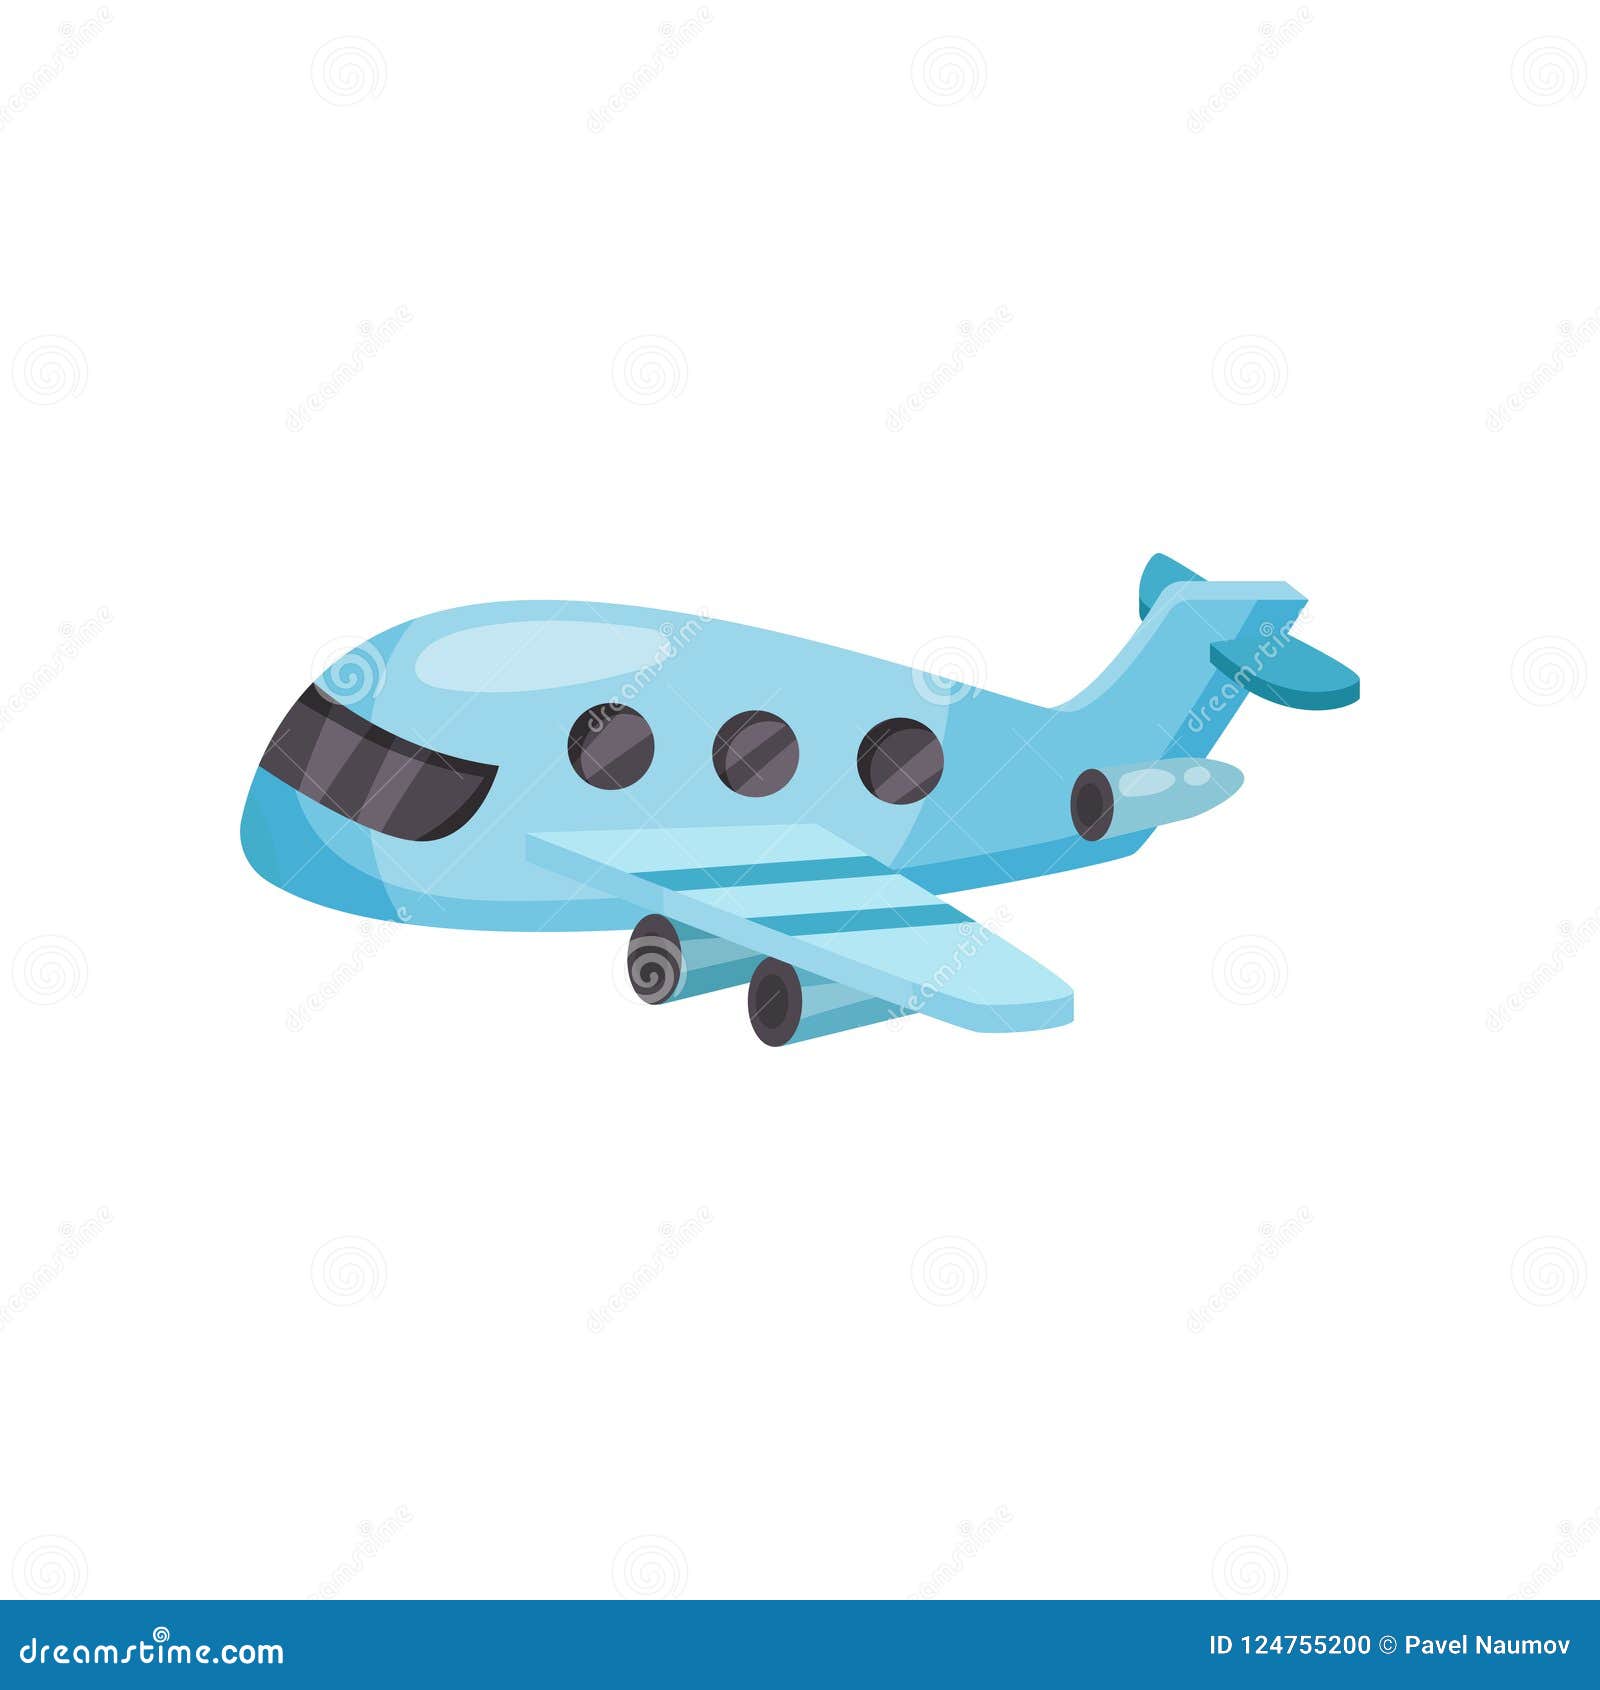 cartoon passenger airplane. small blue plane with jet engines. flat  for mobile game or advertising poster of